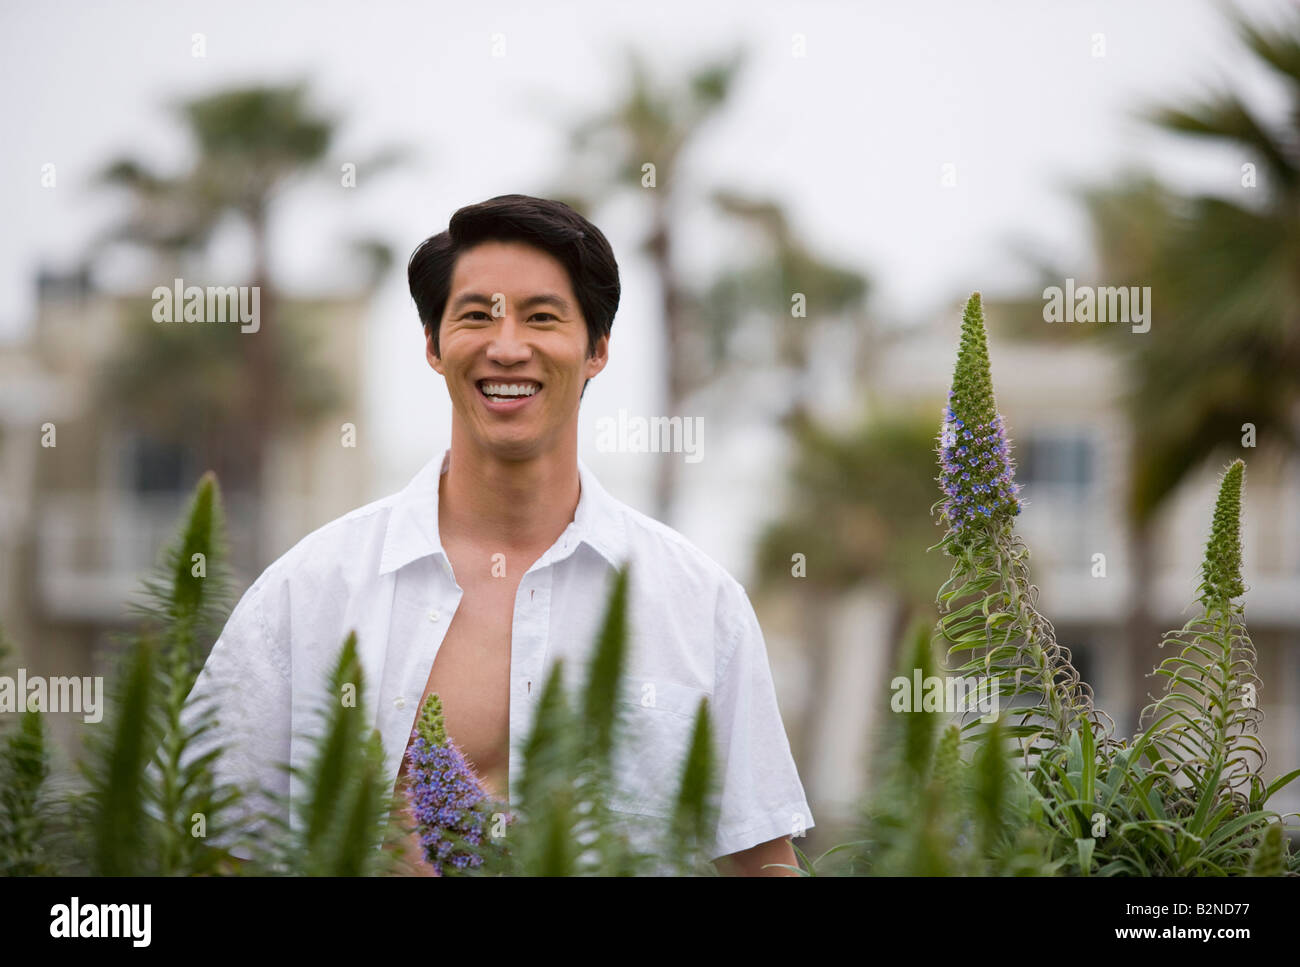 Portrait of a young man standing in a park and smiling, Huntington Beach, California, USA Stock Photo